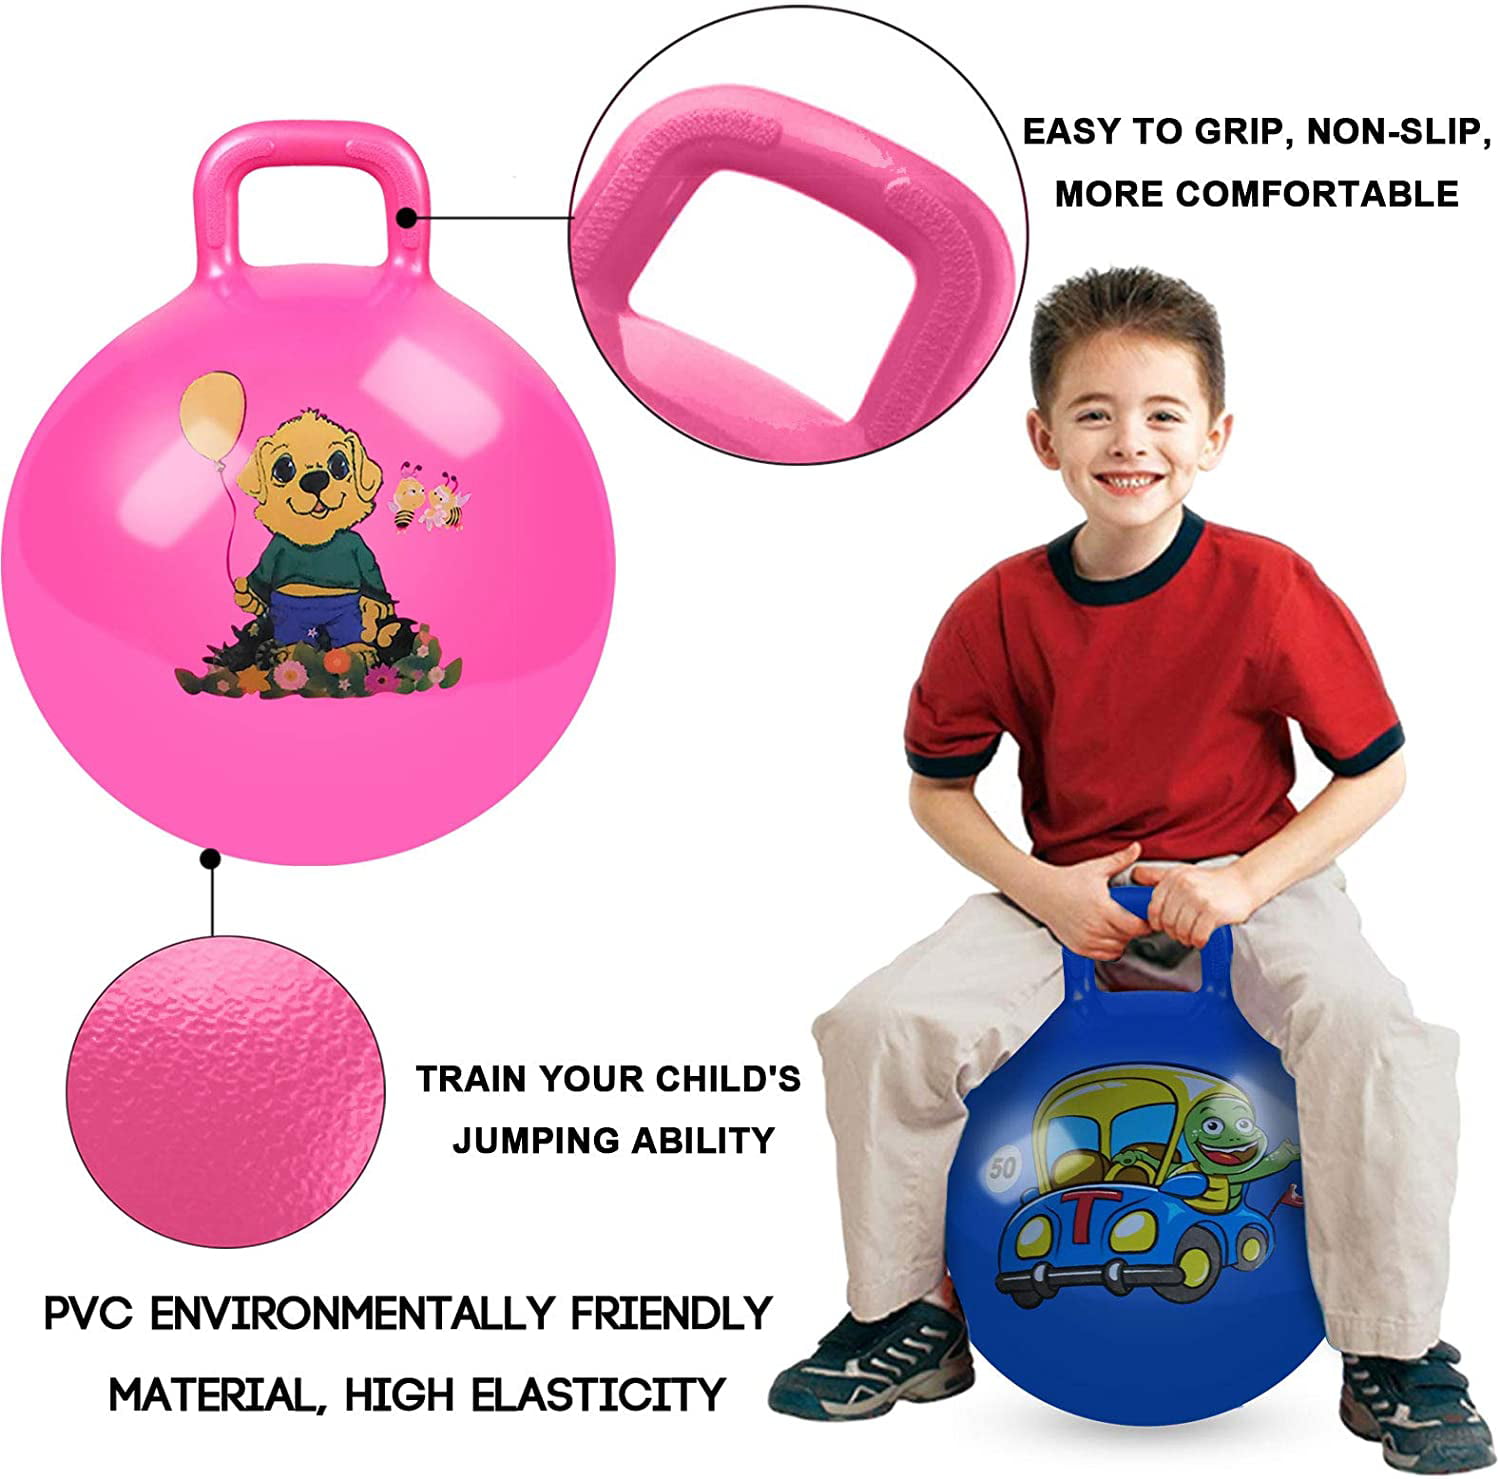 2 Pack Jump Hopper Bouncy Hopping Ball 18 inch with Handle Party Favors for Kids 3-6 Years School Team Family Ride & Jumping